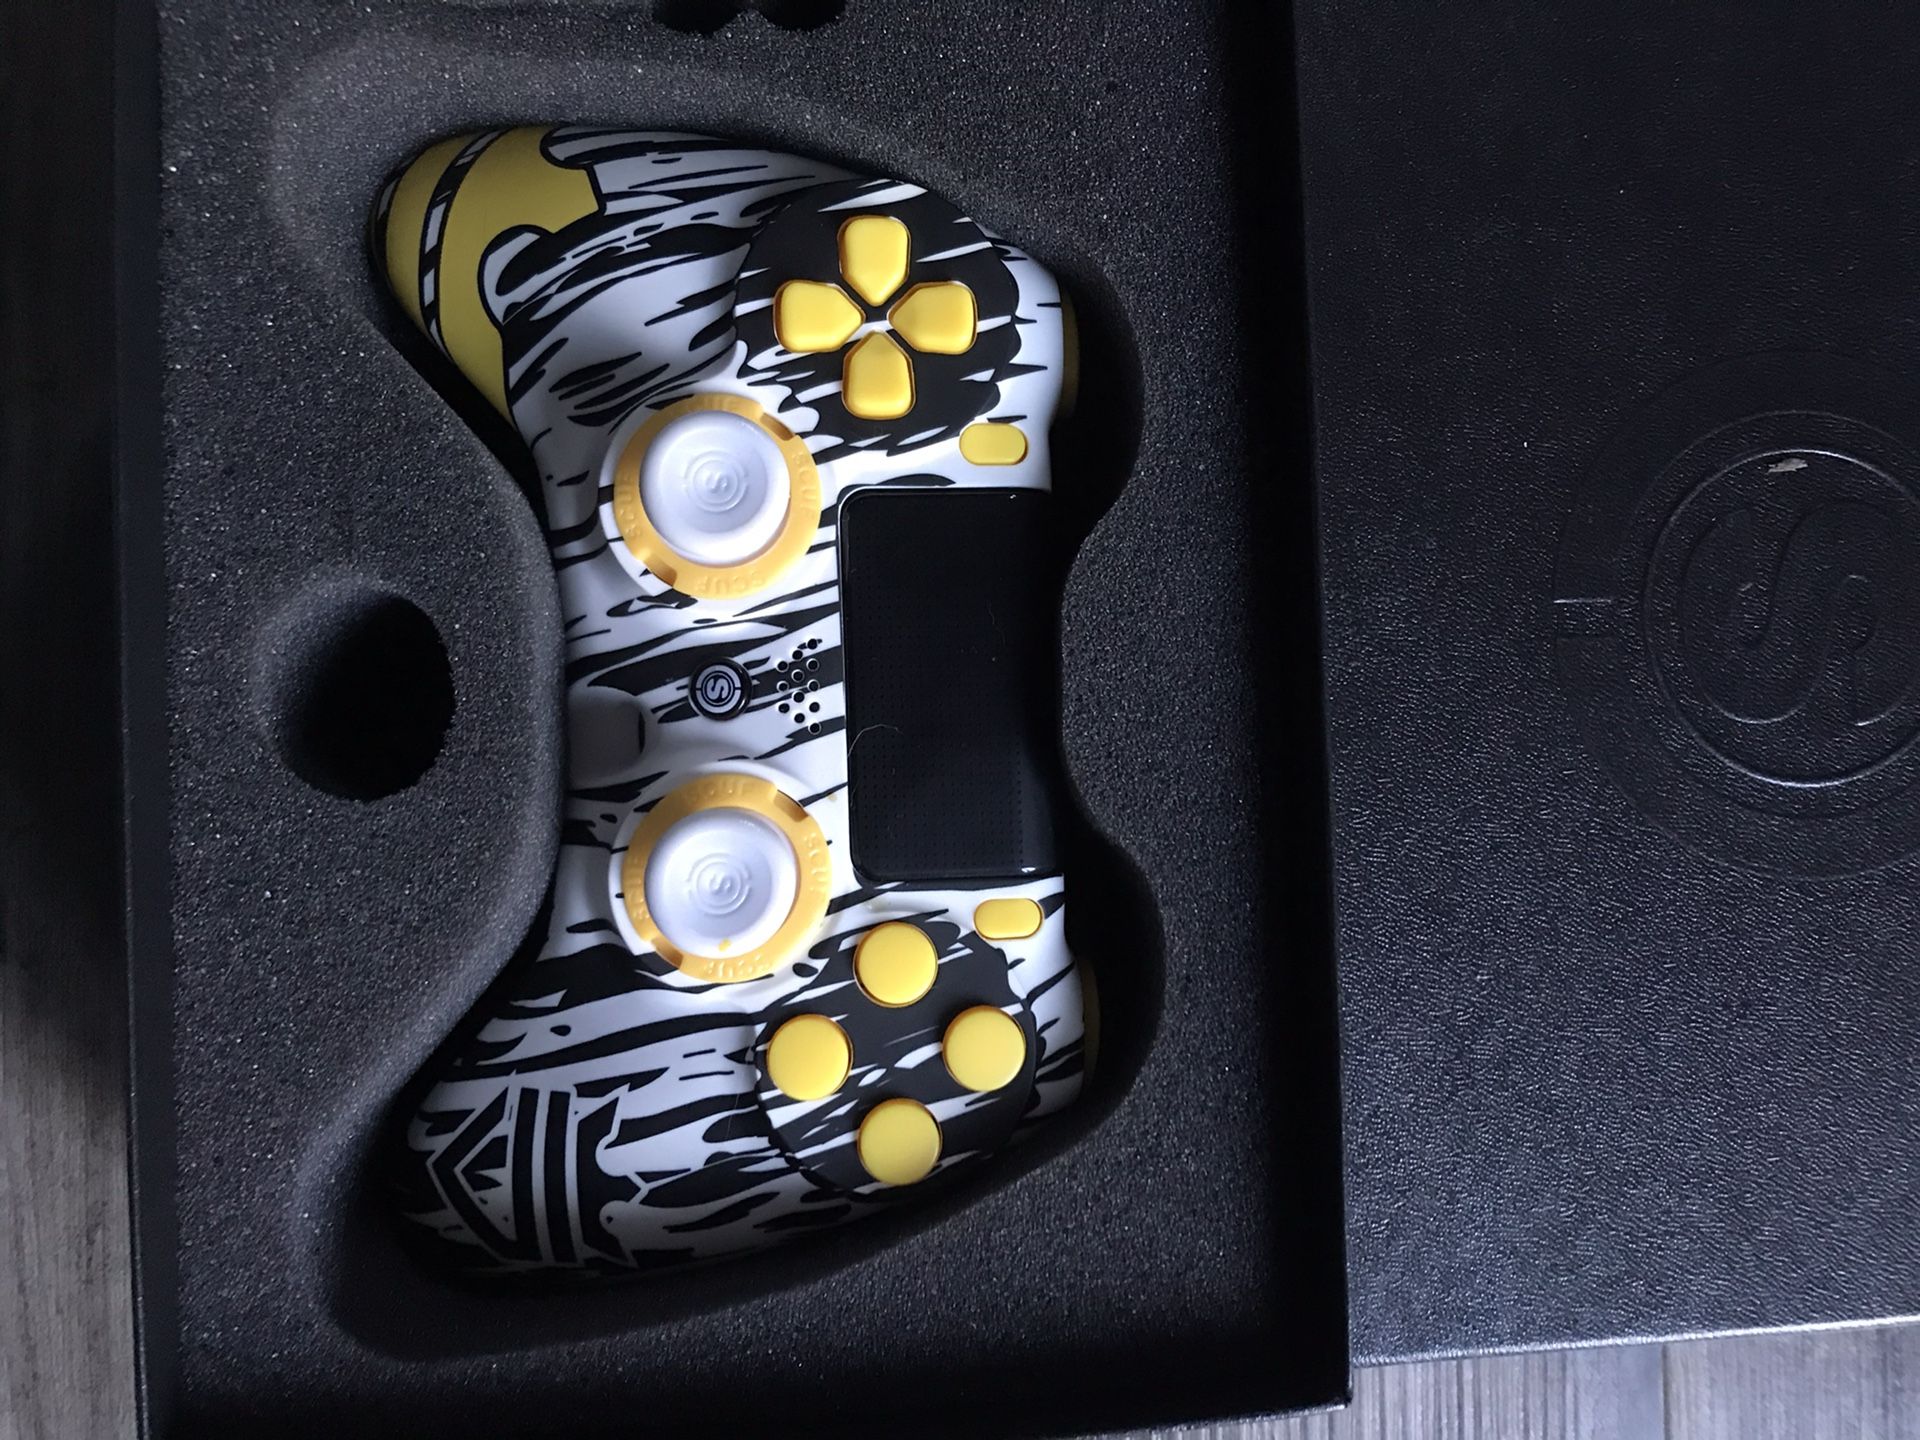 Scuf IMPACT (PS4) Controller Scump Limited Edition